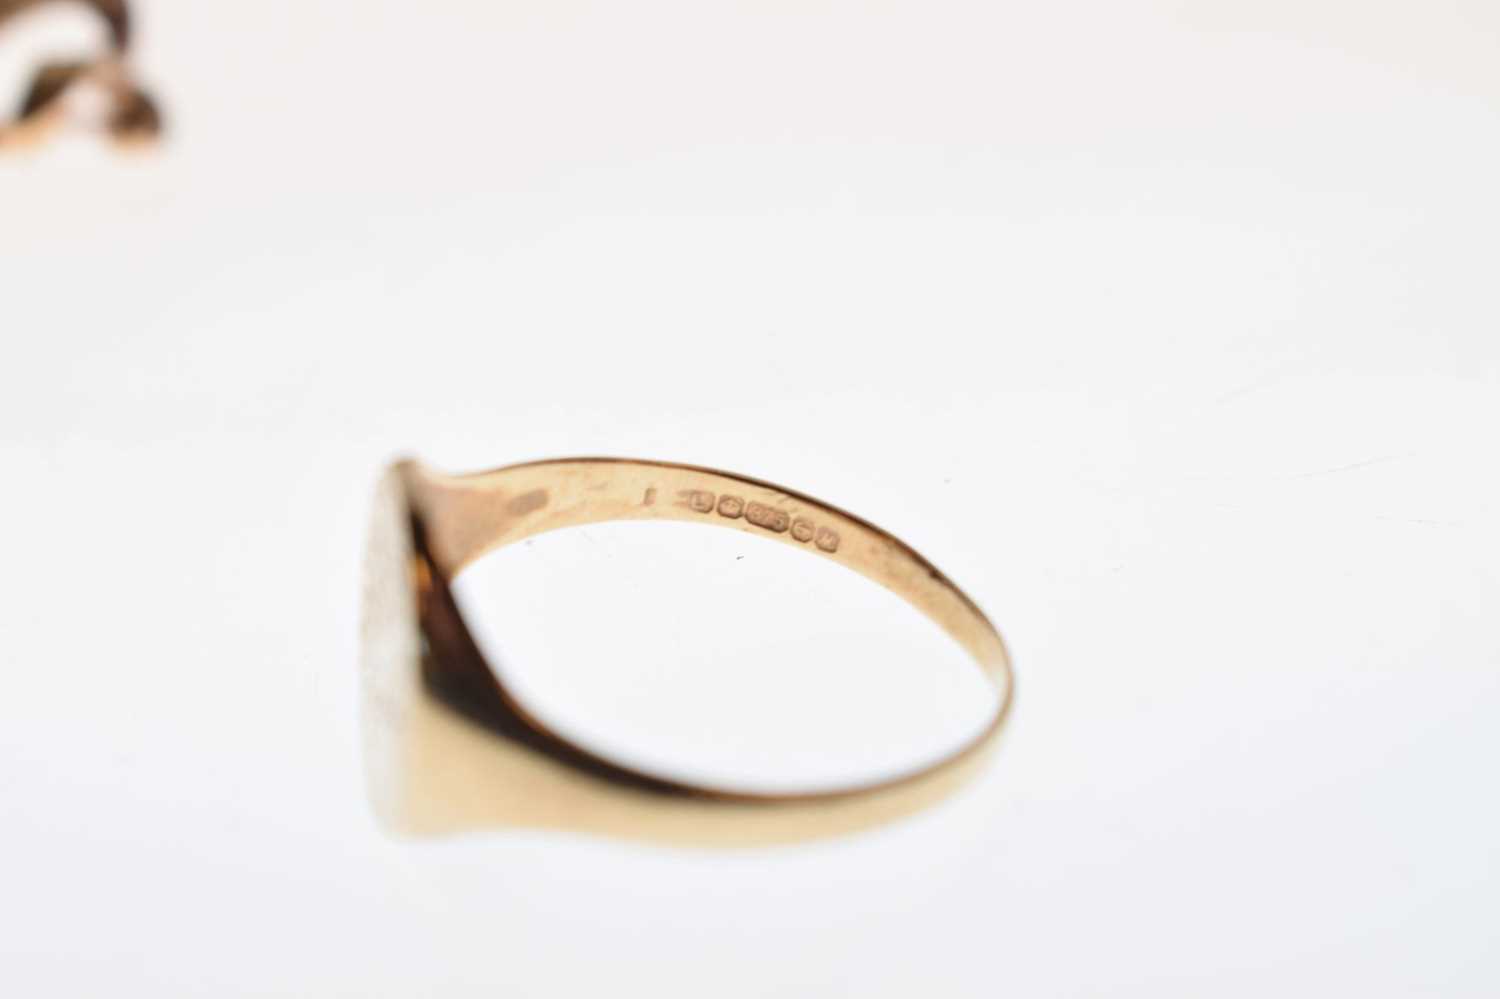 9ct gold half-engraved oval signet ring - Image 4 of 7